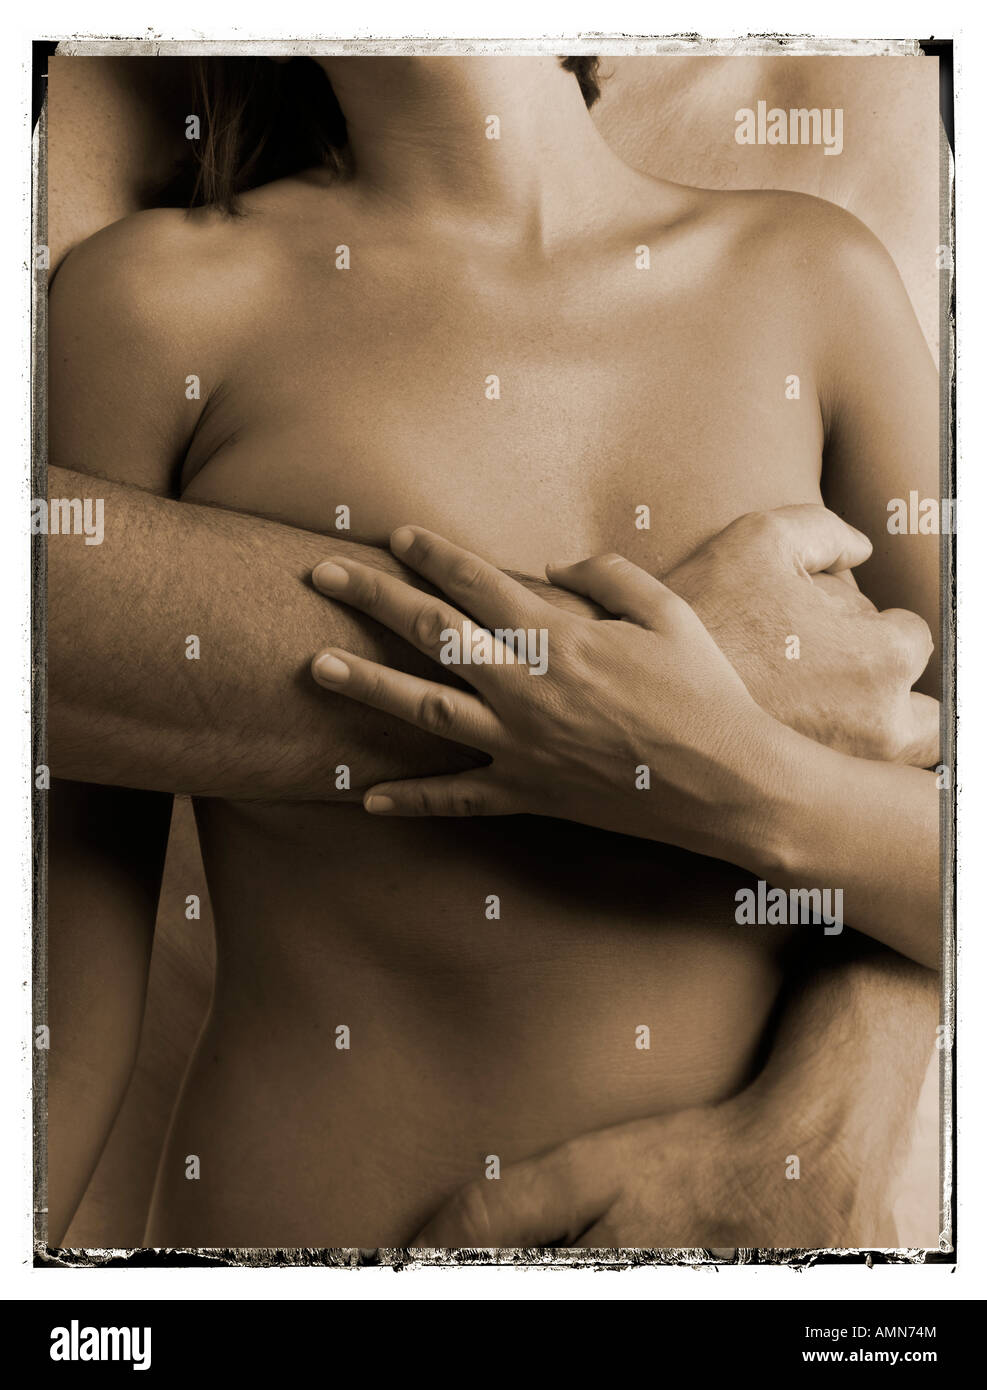 Naked couple hugging. Man's arm hiding women's breast. Romantic sexual  Stock Photo - Alamy